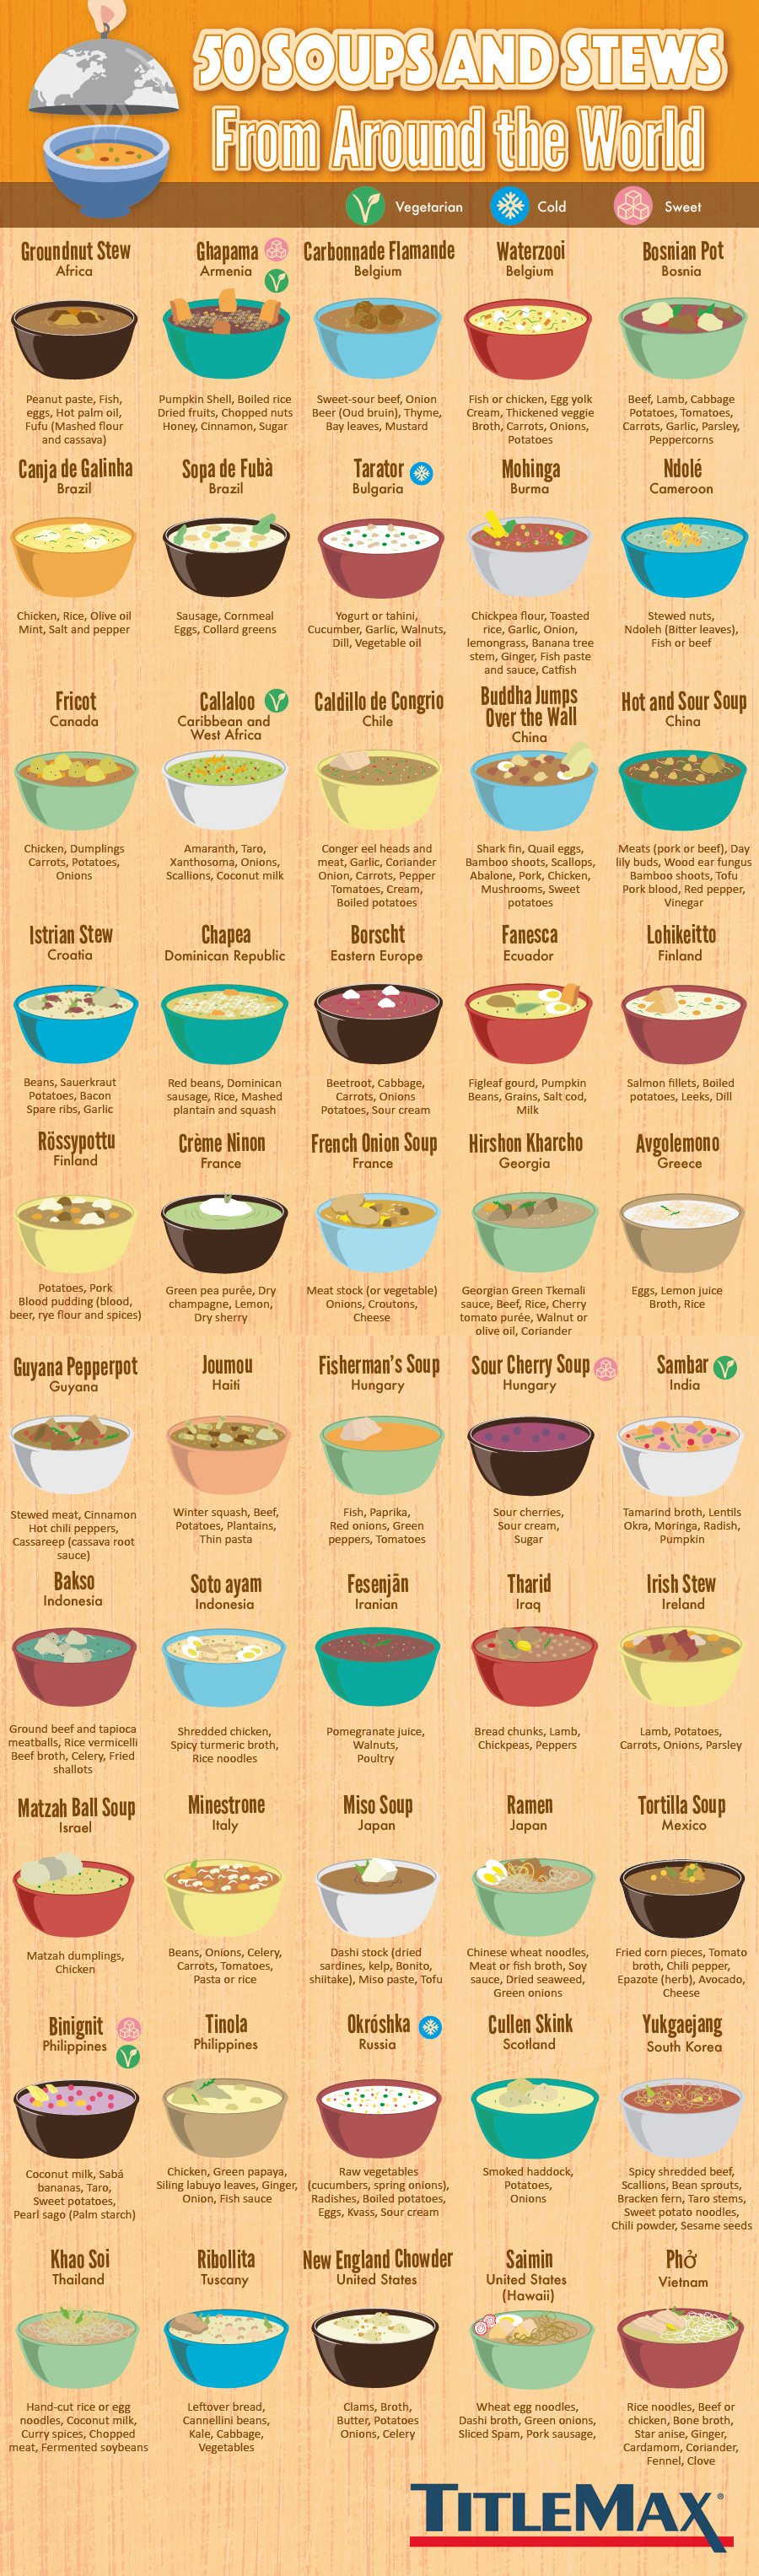 Around the World in 50 Soups (and Stews)! - Infographic